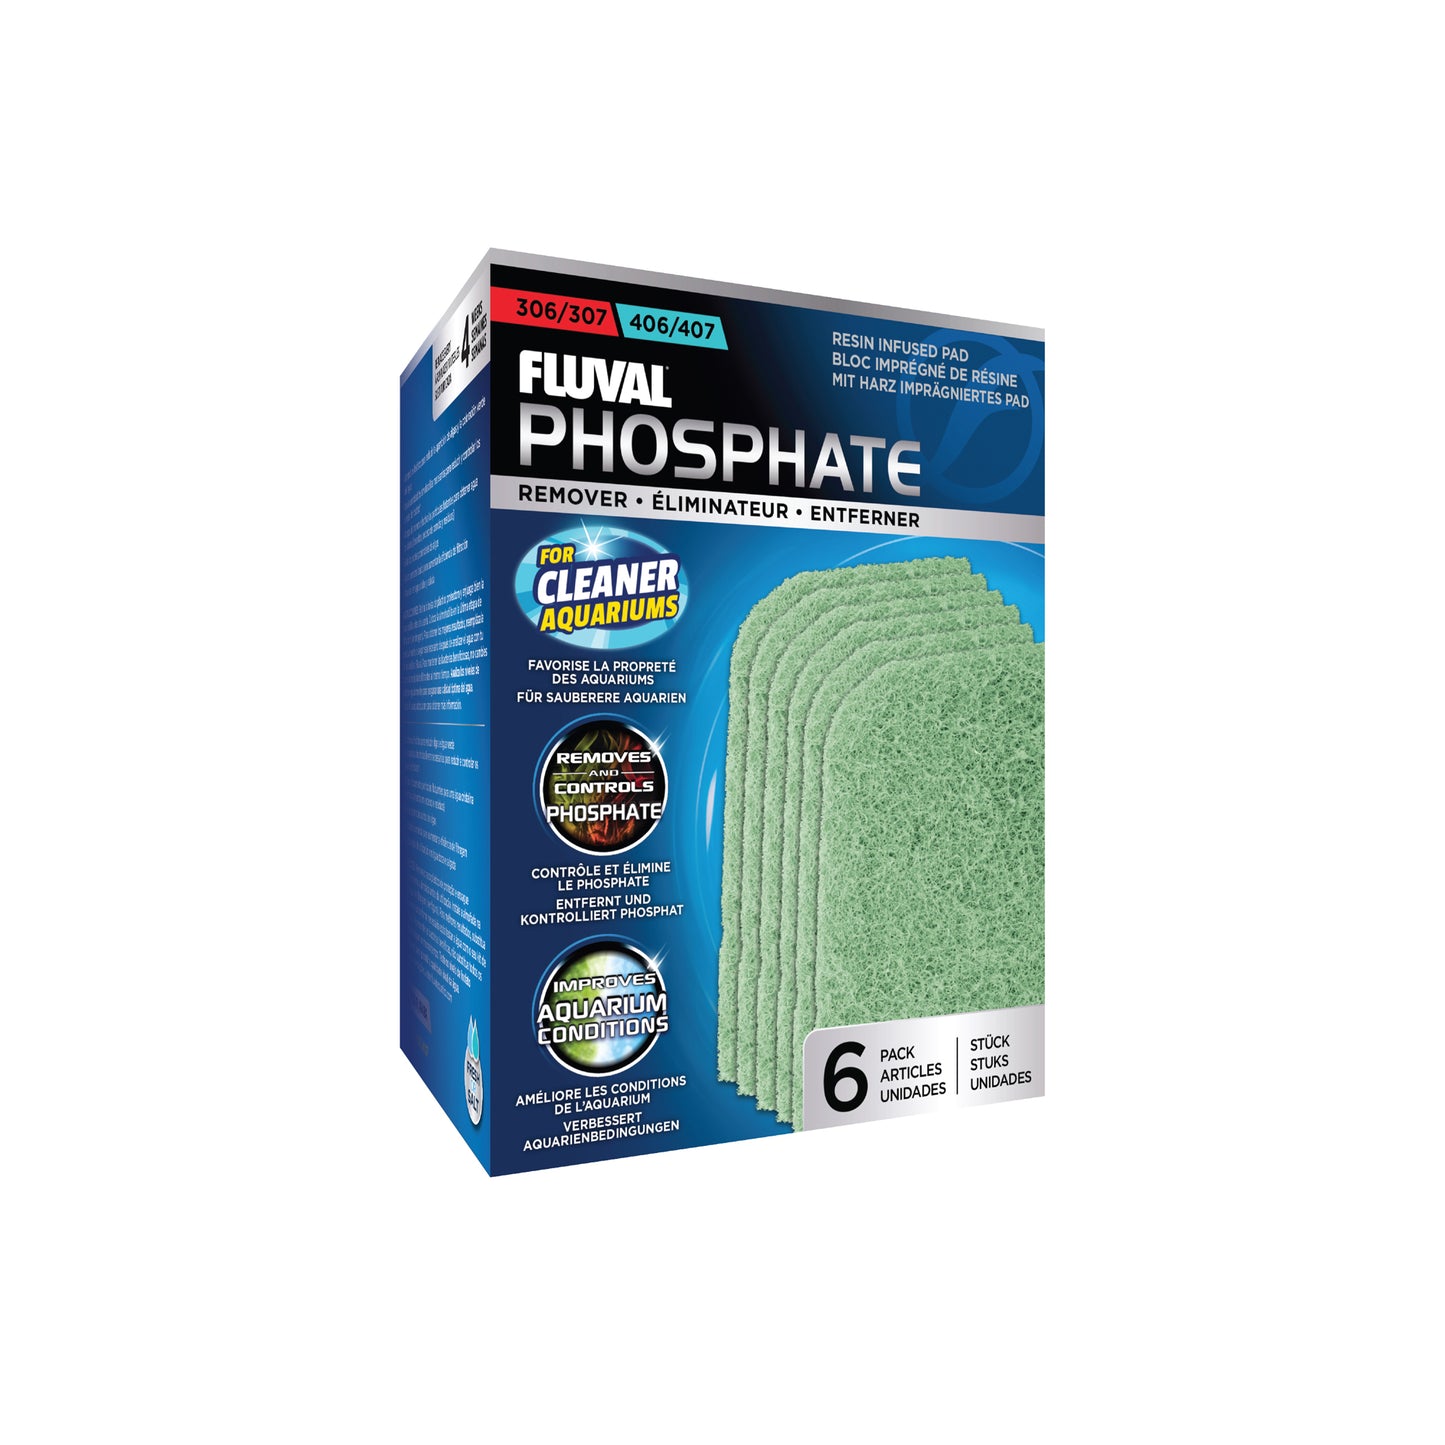 Fluval 307/407 Phosphate Remover Pad, Replacement Aquarium Canister Filter Media